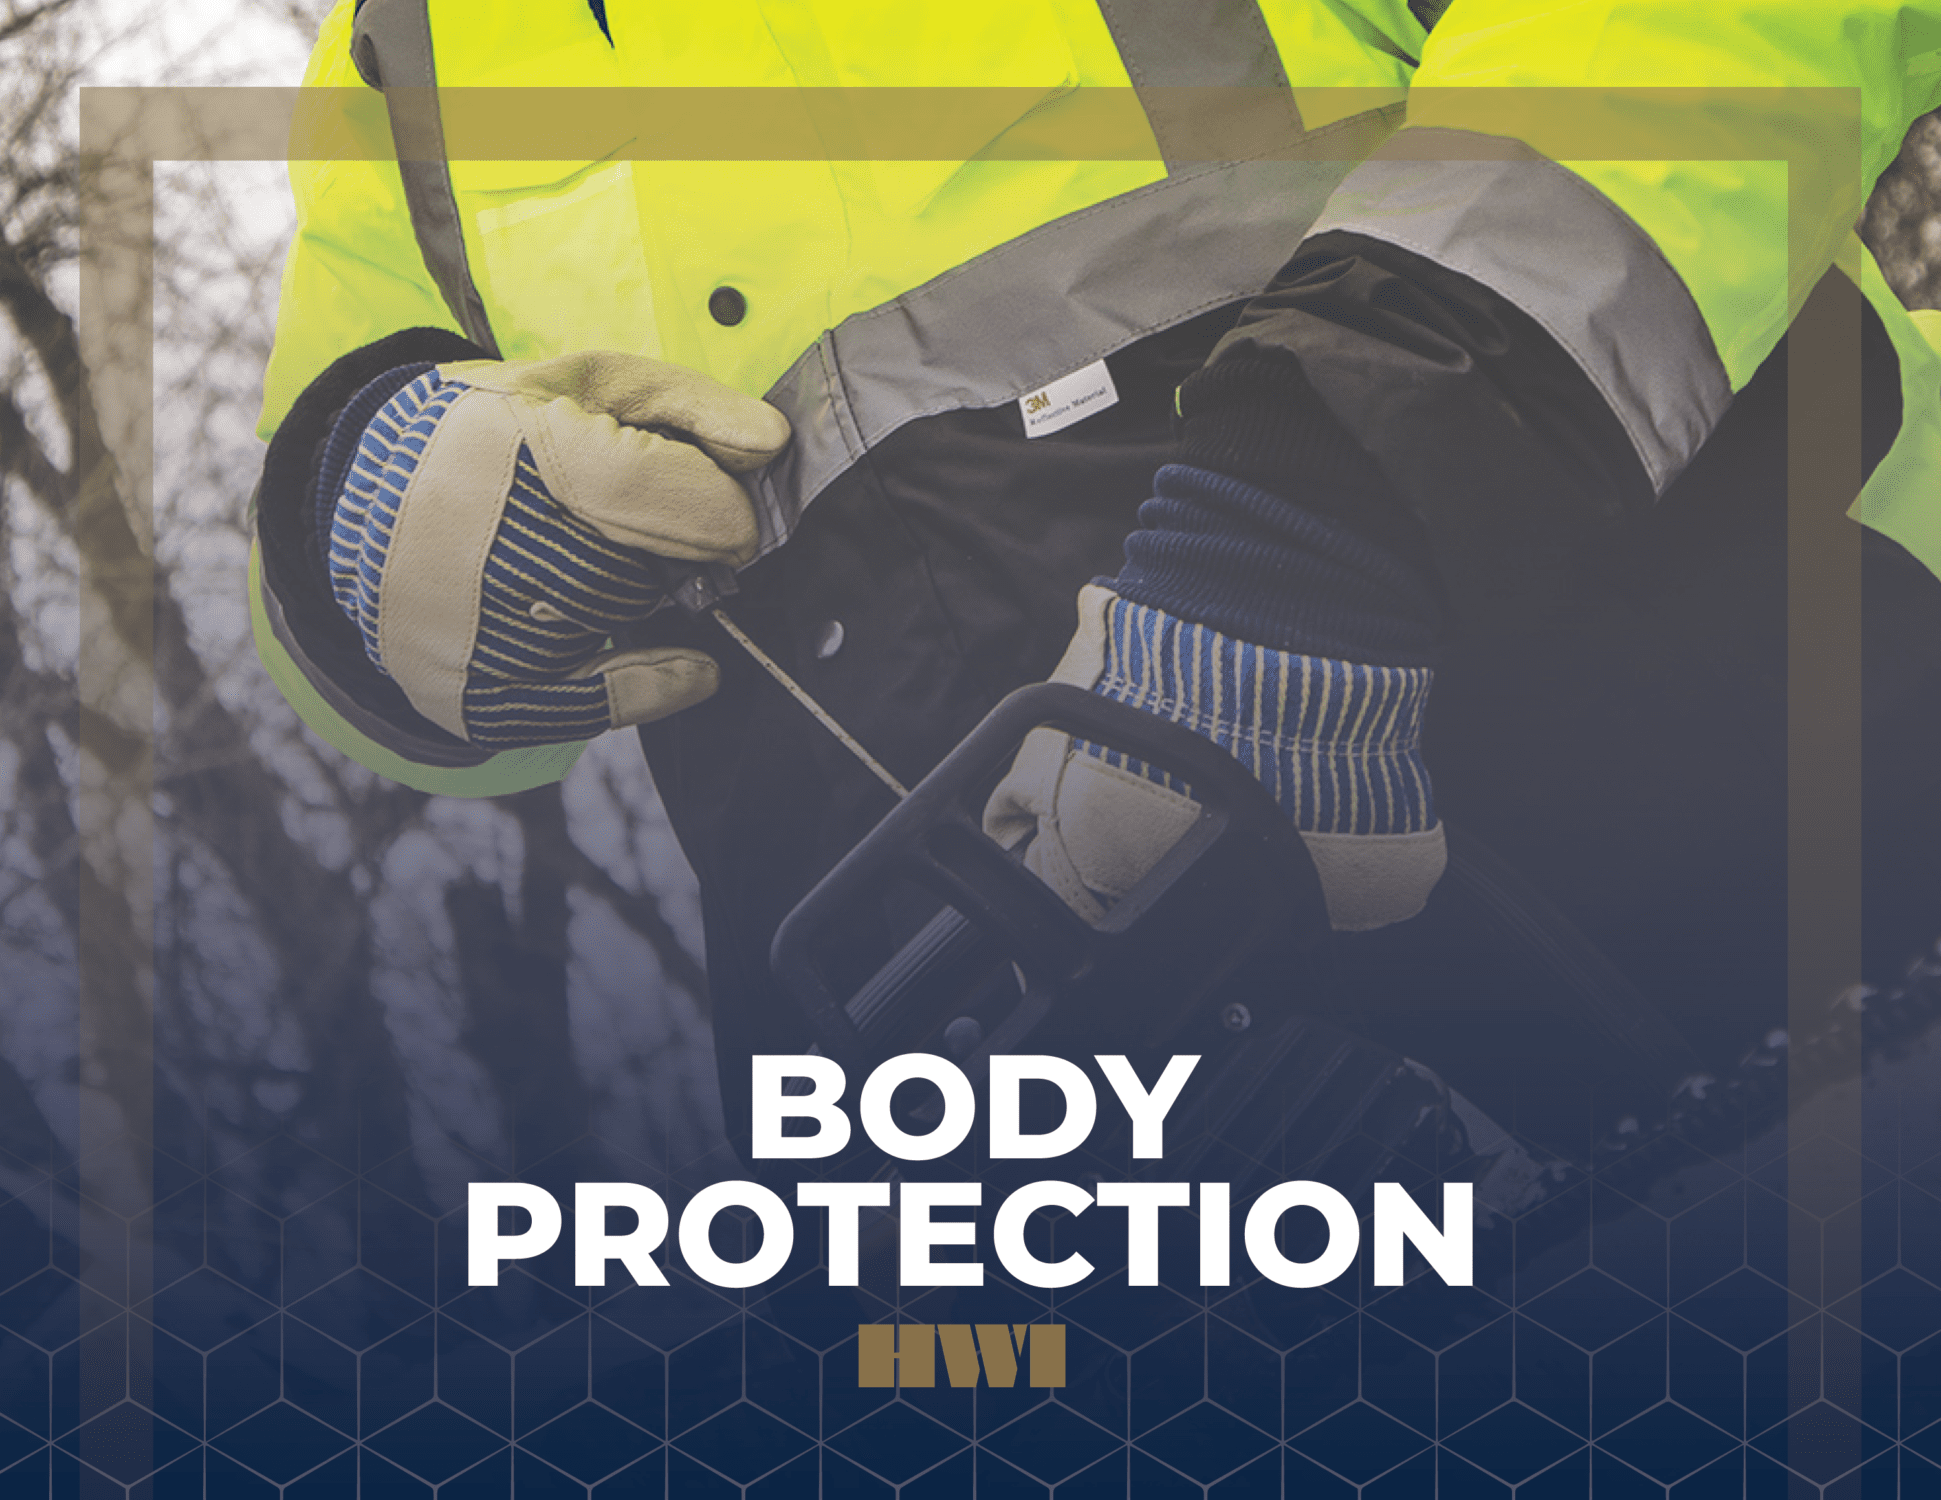 Body protection